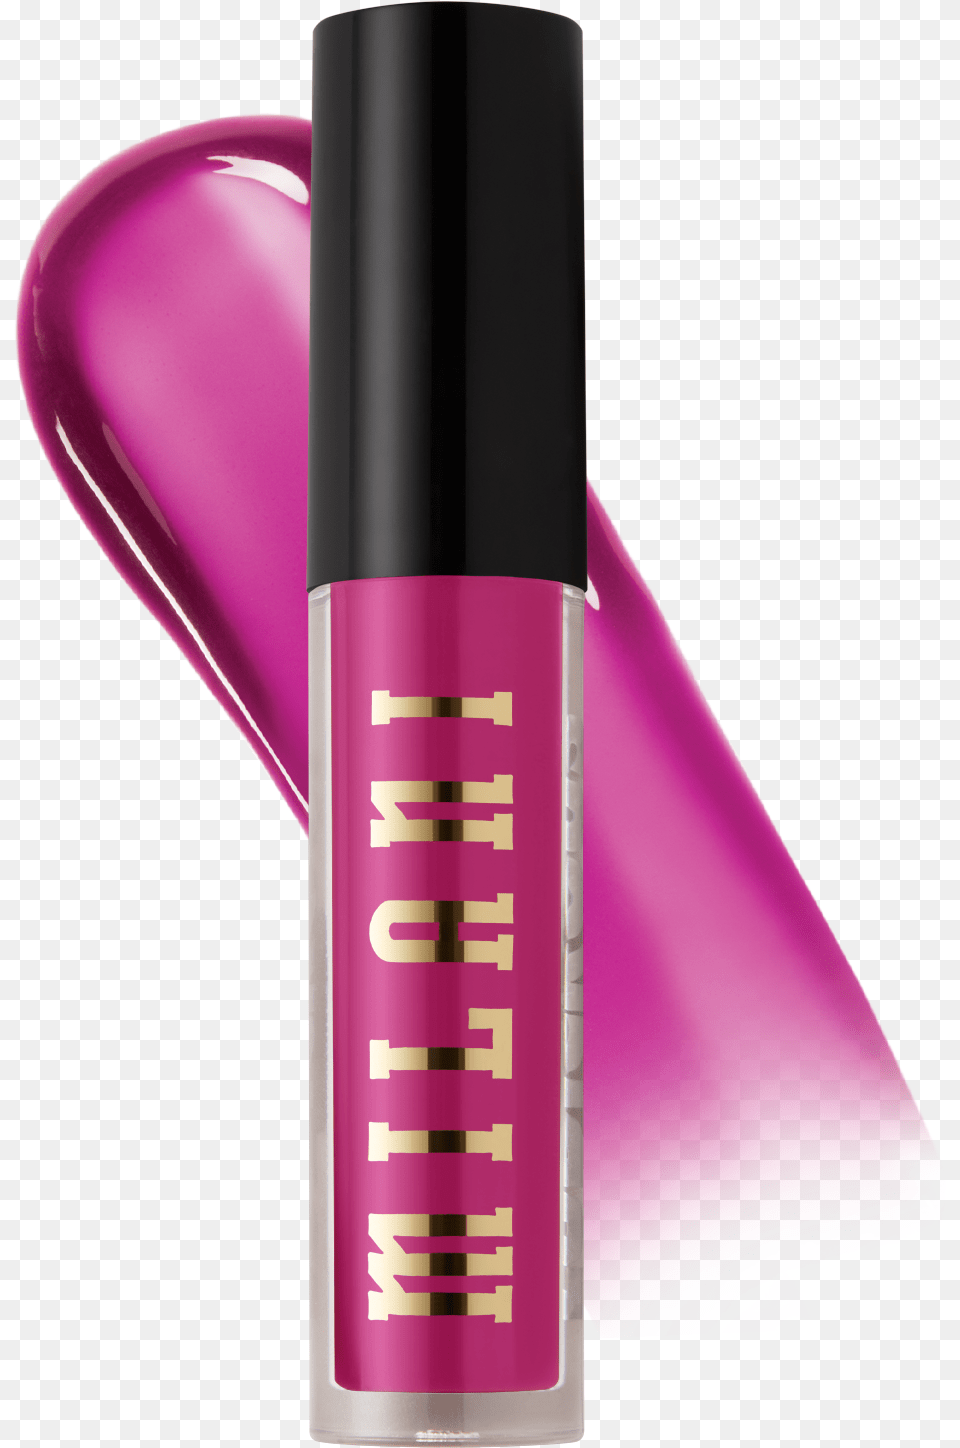 Milani Ludicrous Lip Gloss In Power Suit On White Background Perfume, Cosmetics, Bottle, Dynamite, Weapon Free Png Download